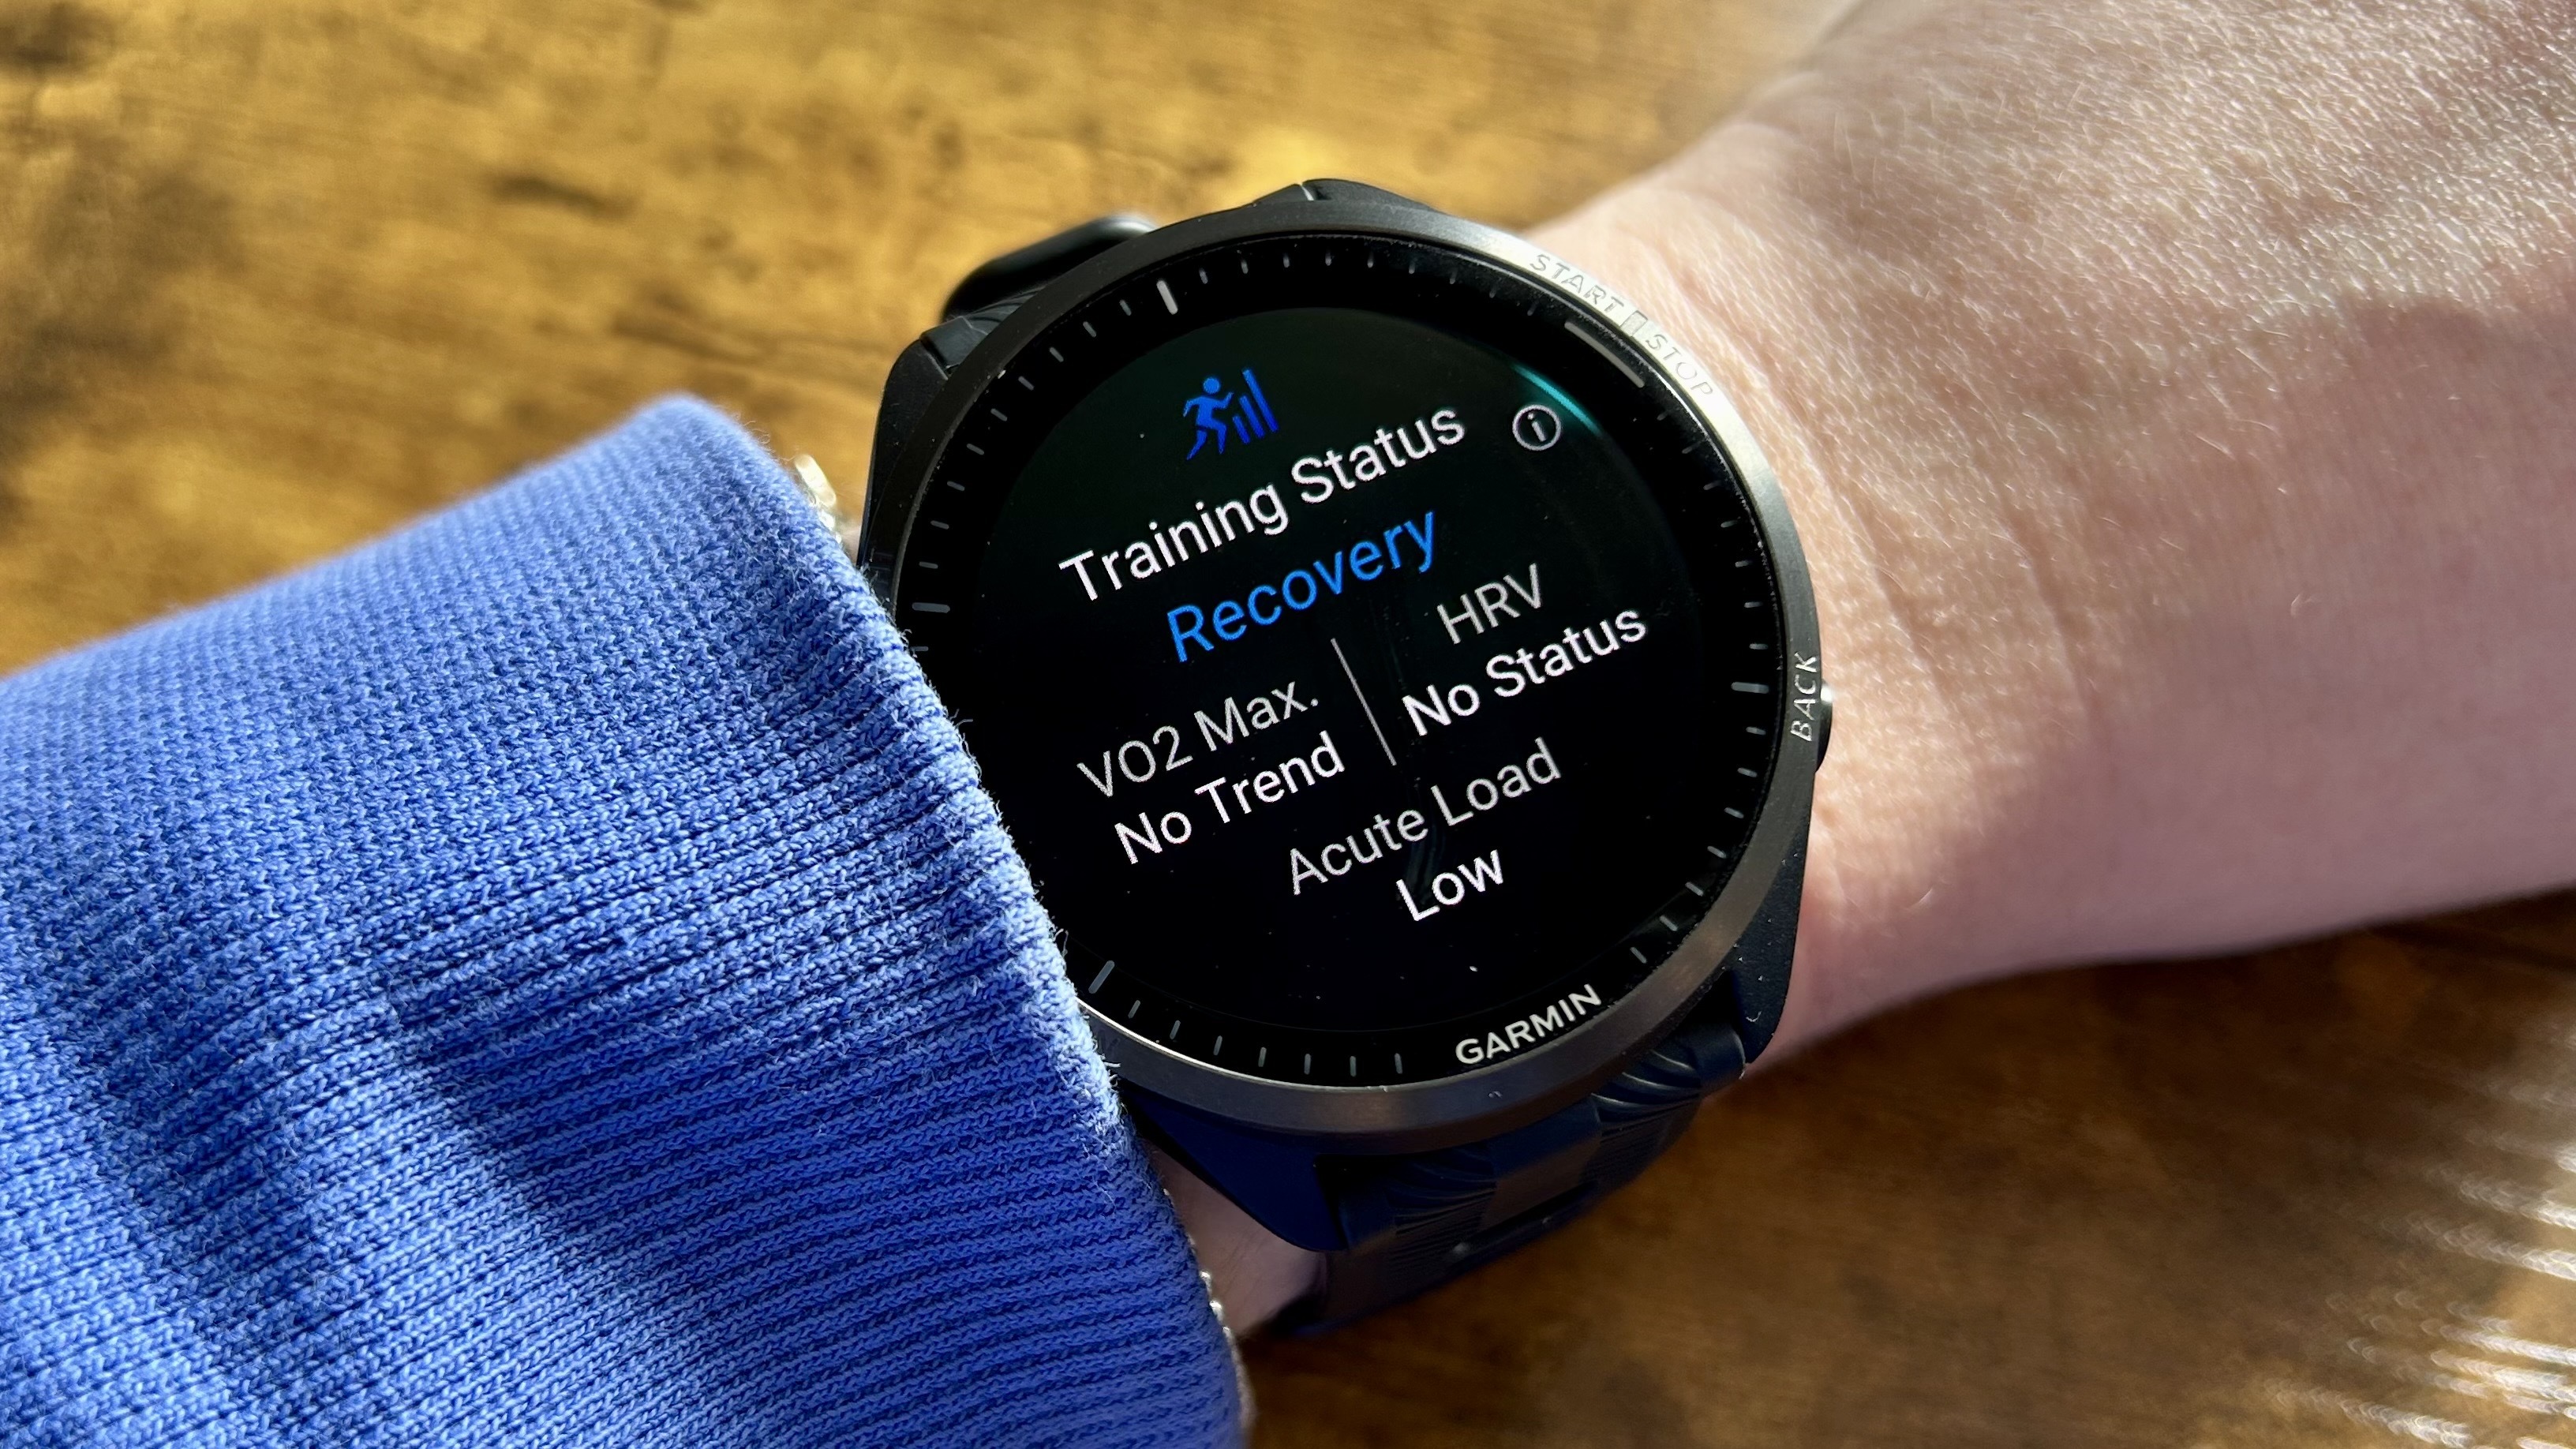 How to the Training Status feature on your Garmin Watch | Tom's Guide